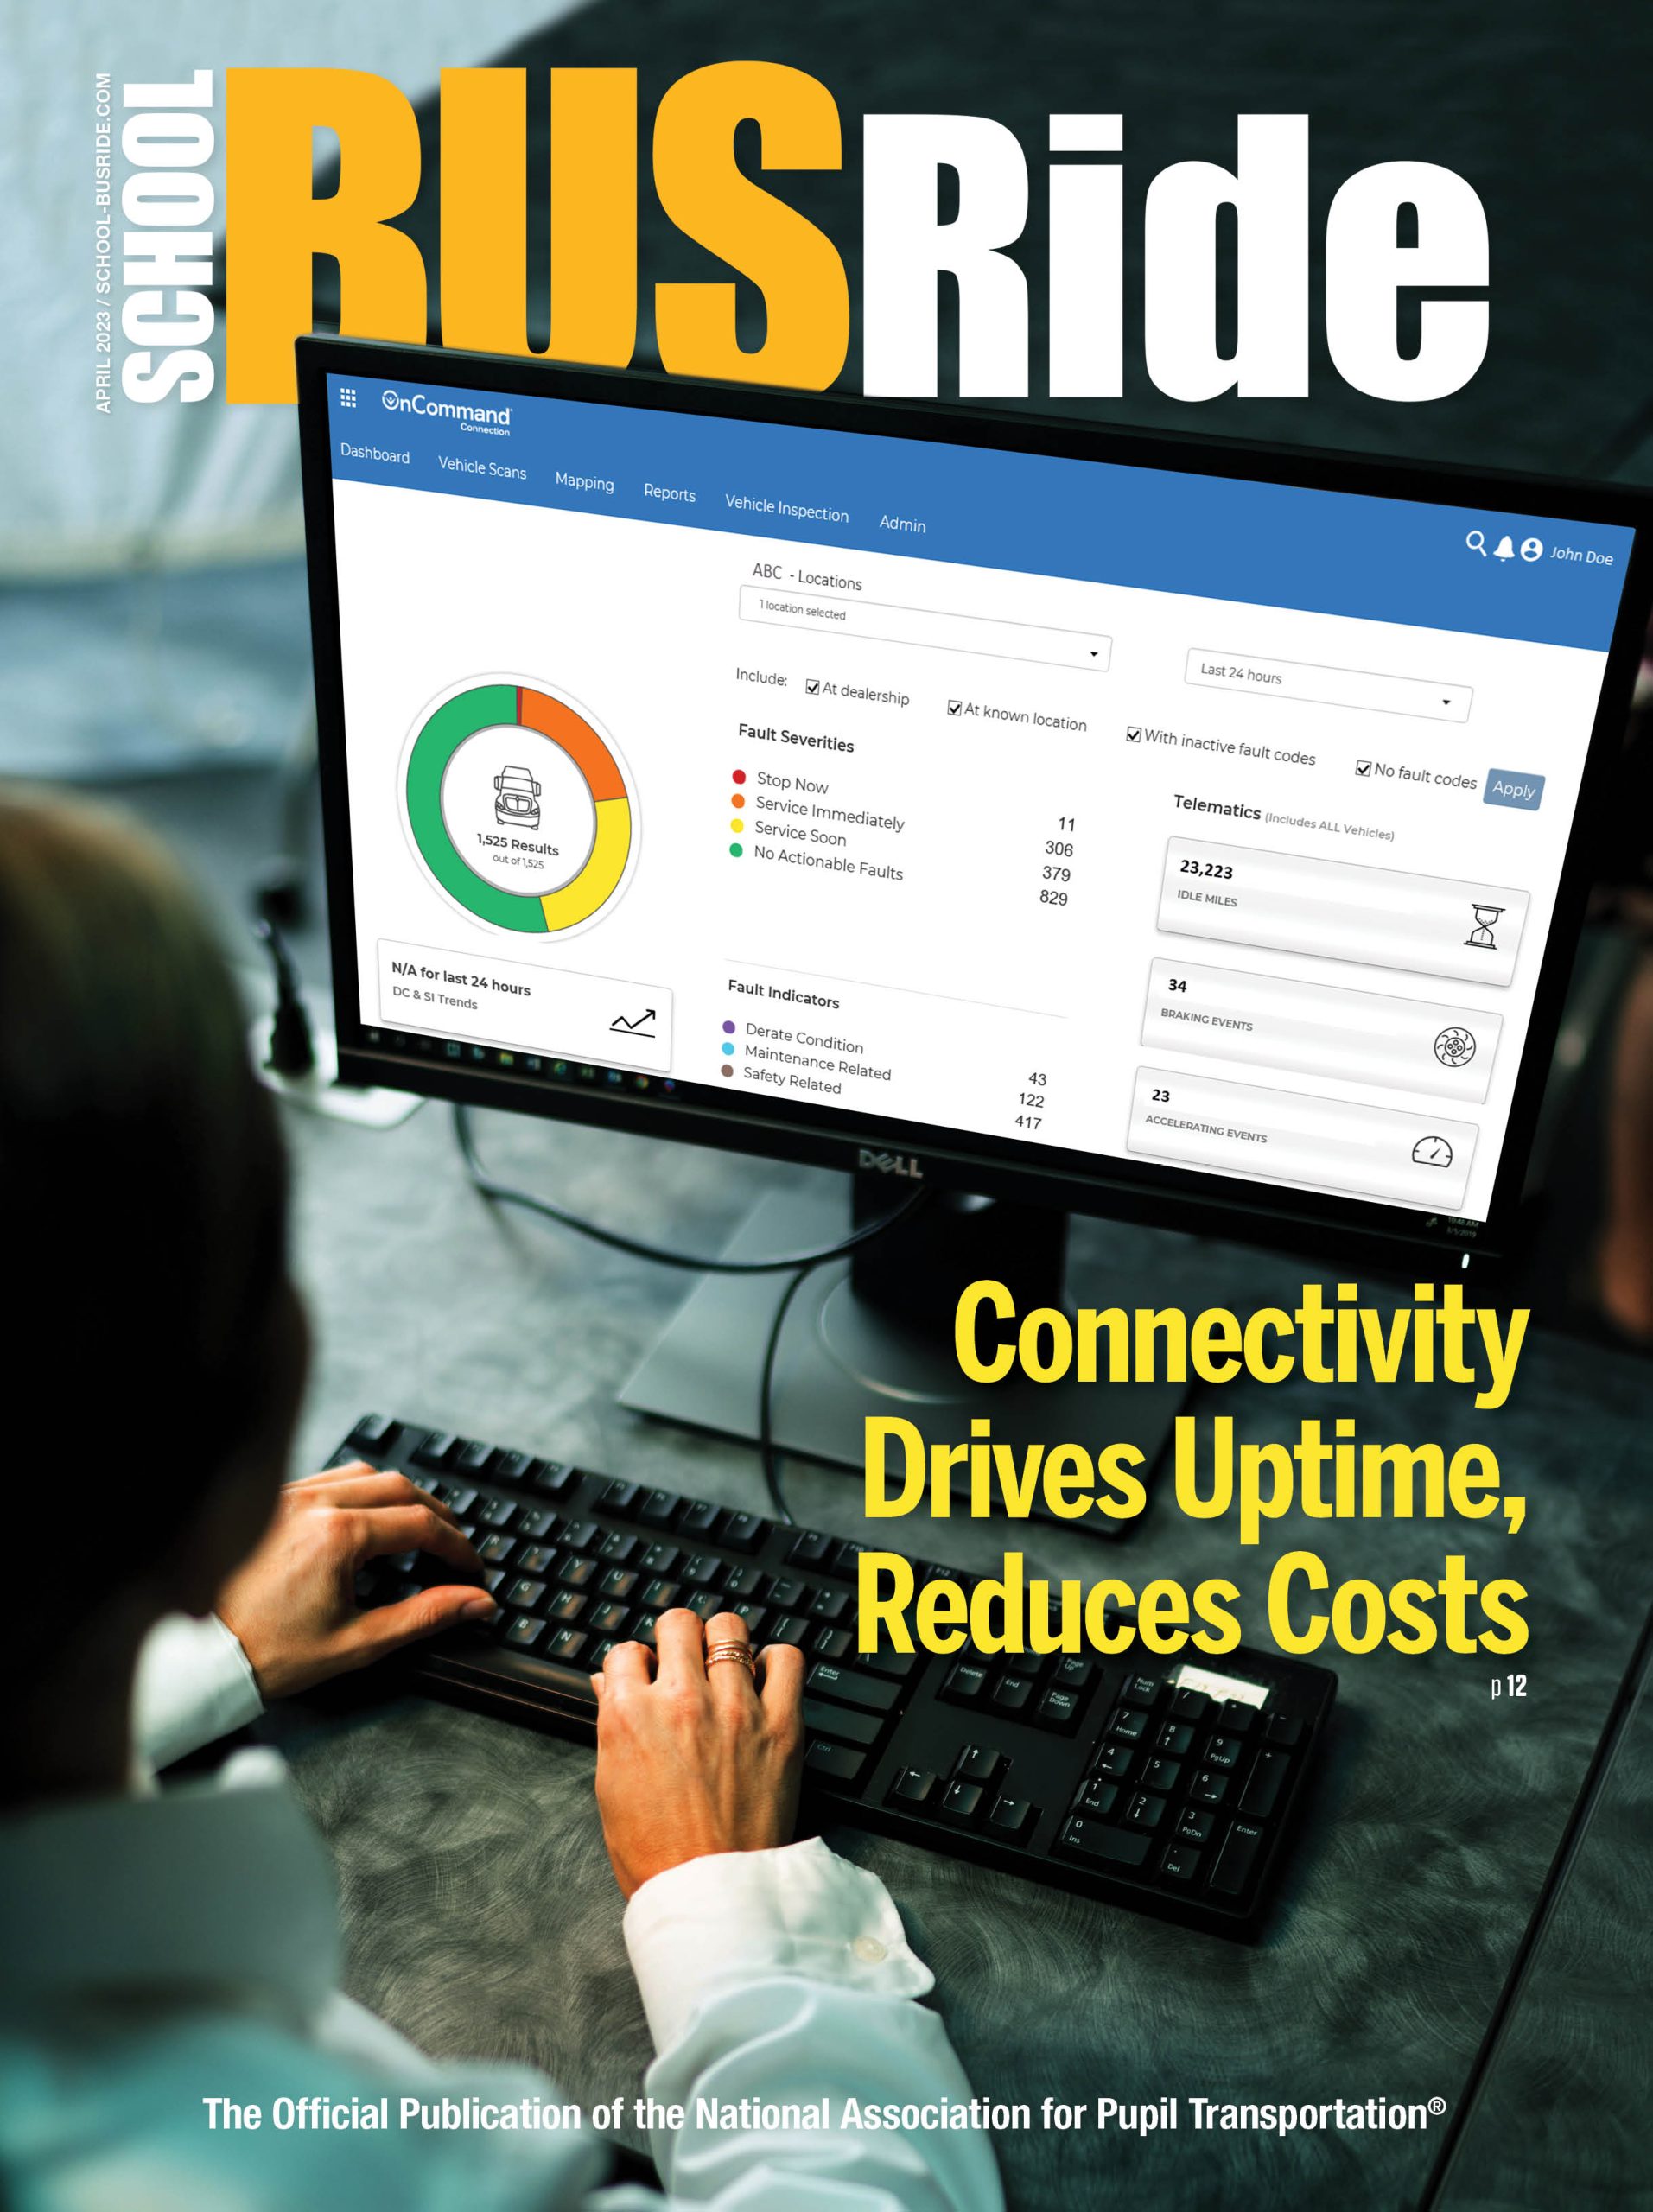 Connectivity Drives Uptime, Reduces Costs